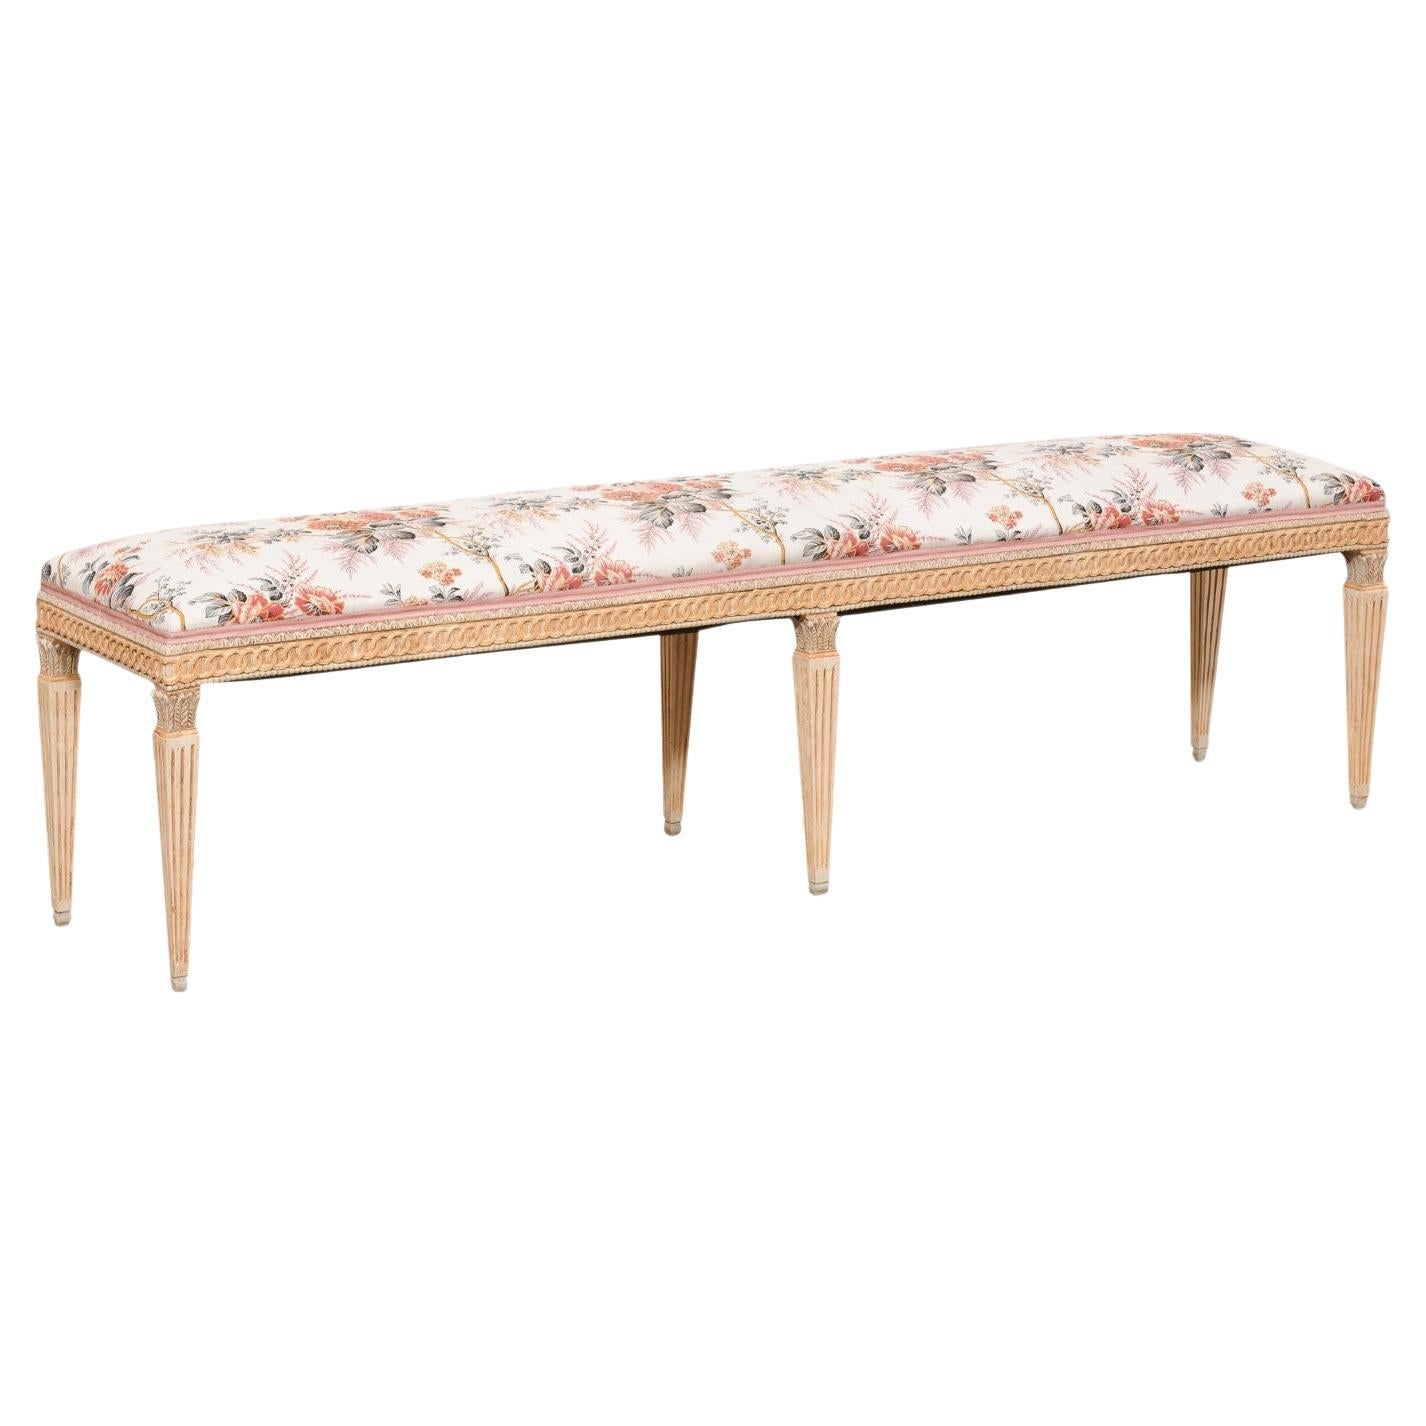 French Louis XVI Style Carved-Wood Slender Bench with Upholstered Seat